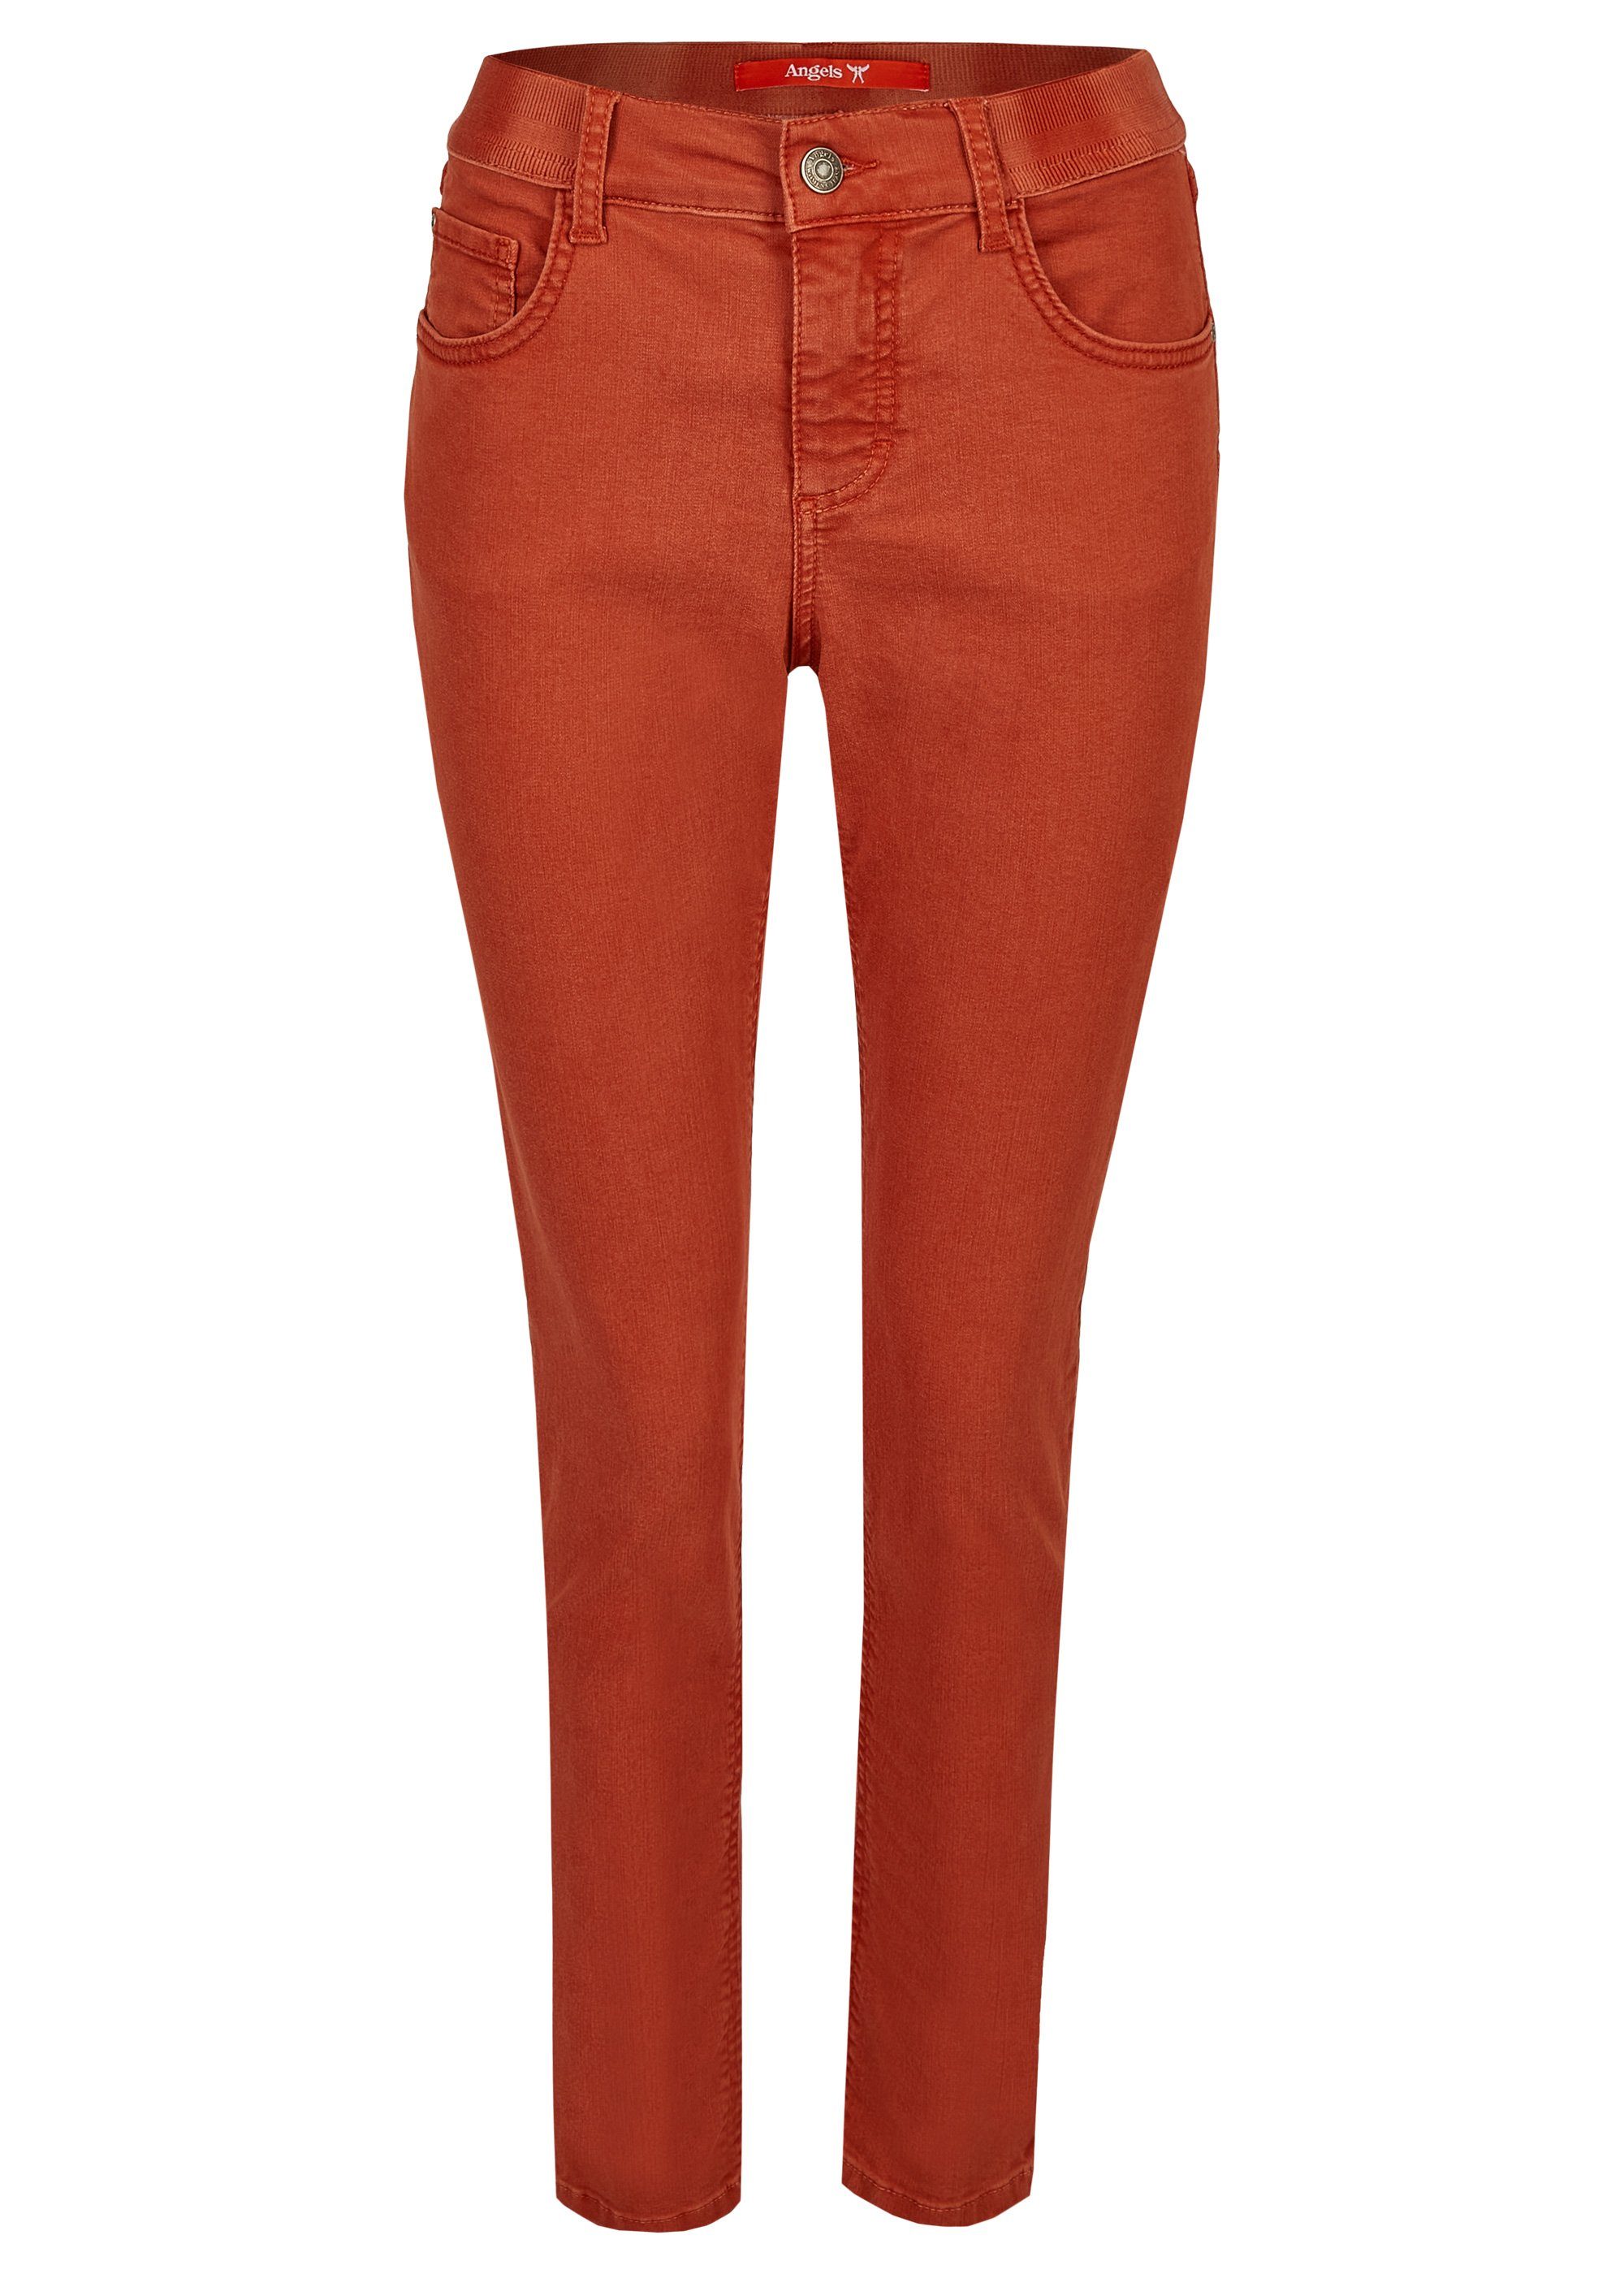 ANGELS Stretch-Jeans ANGELS JEANS ONE SIZE rost orange 199 | Slim-Fit Jeans